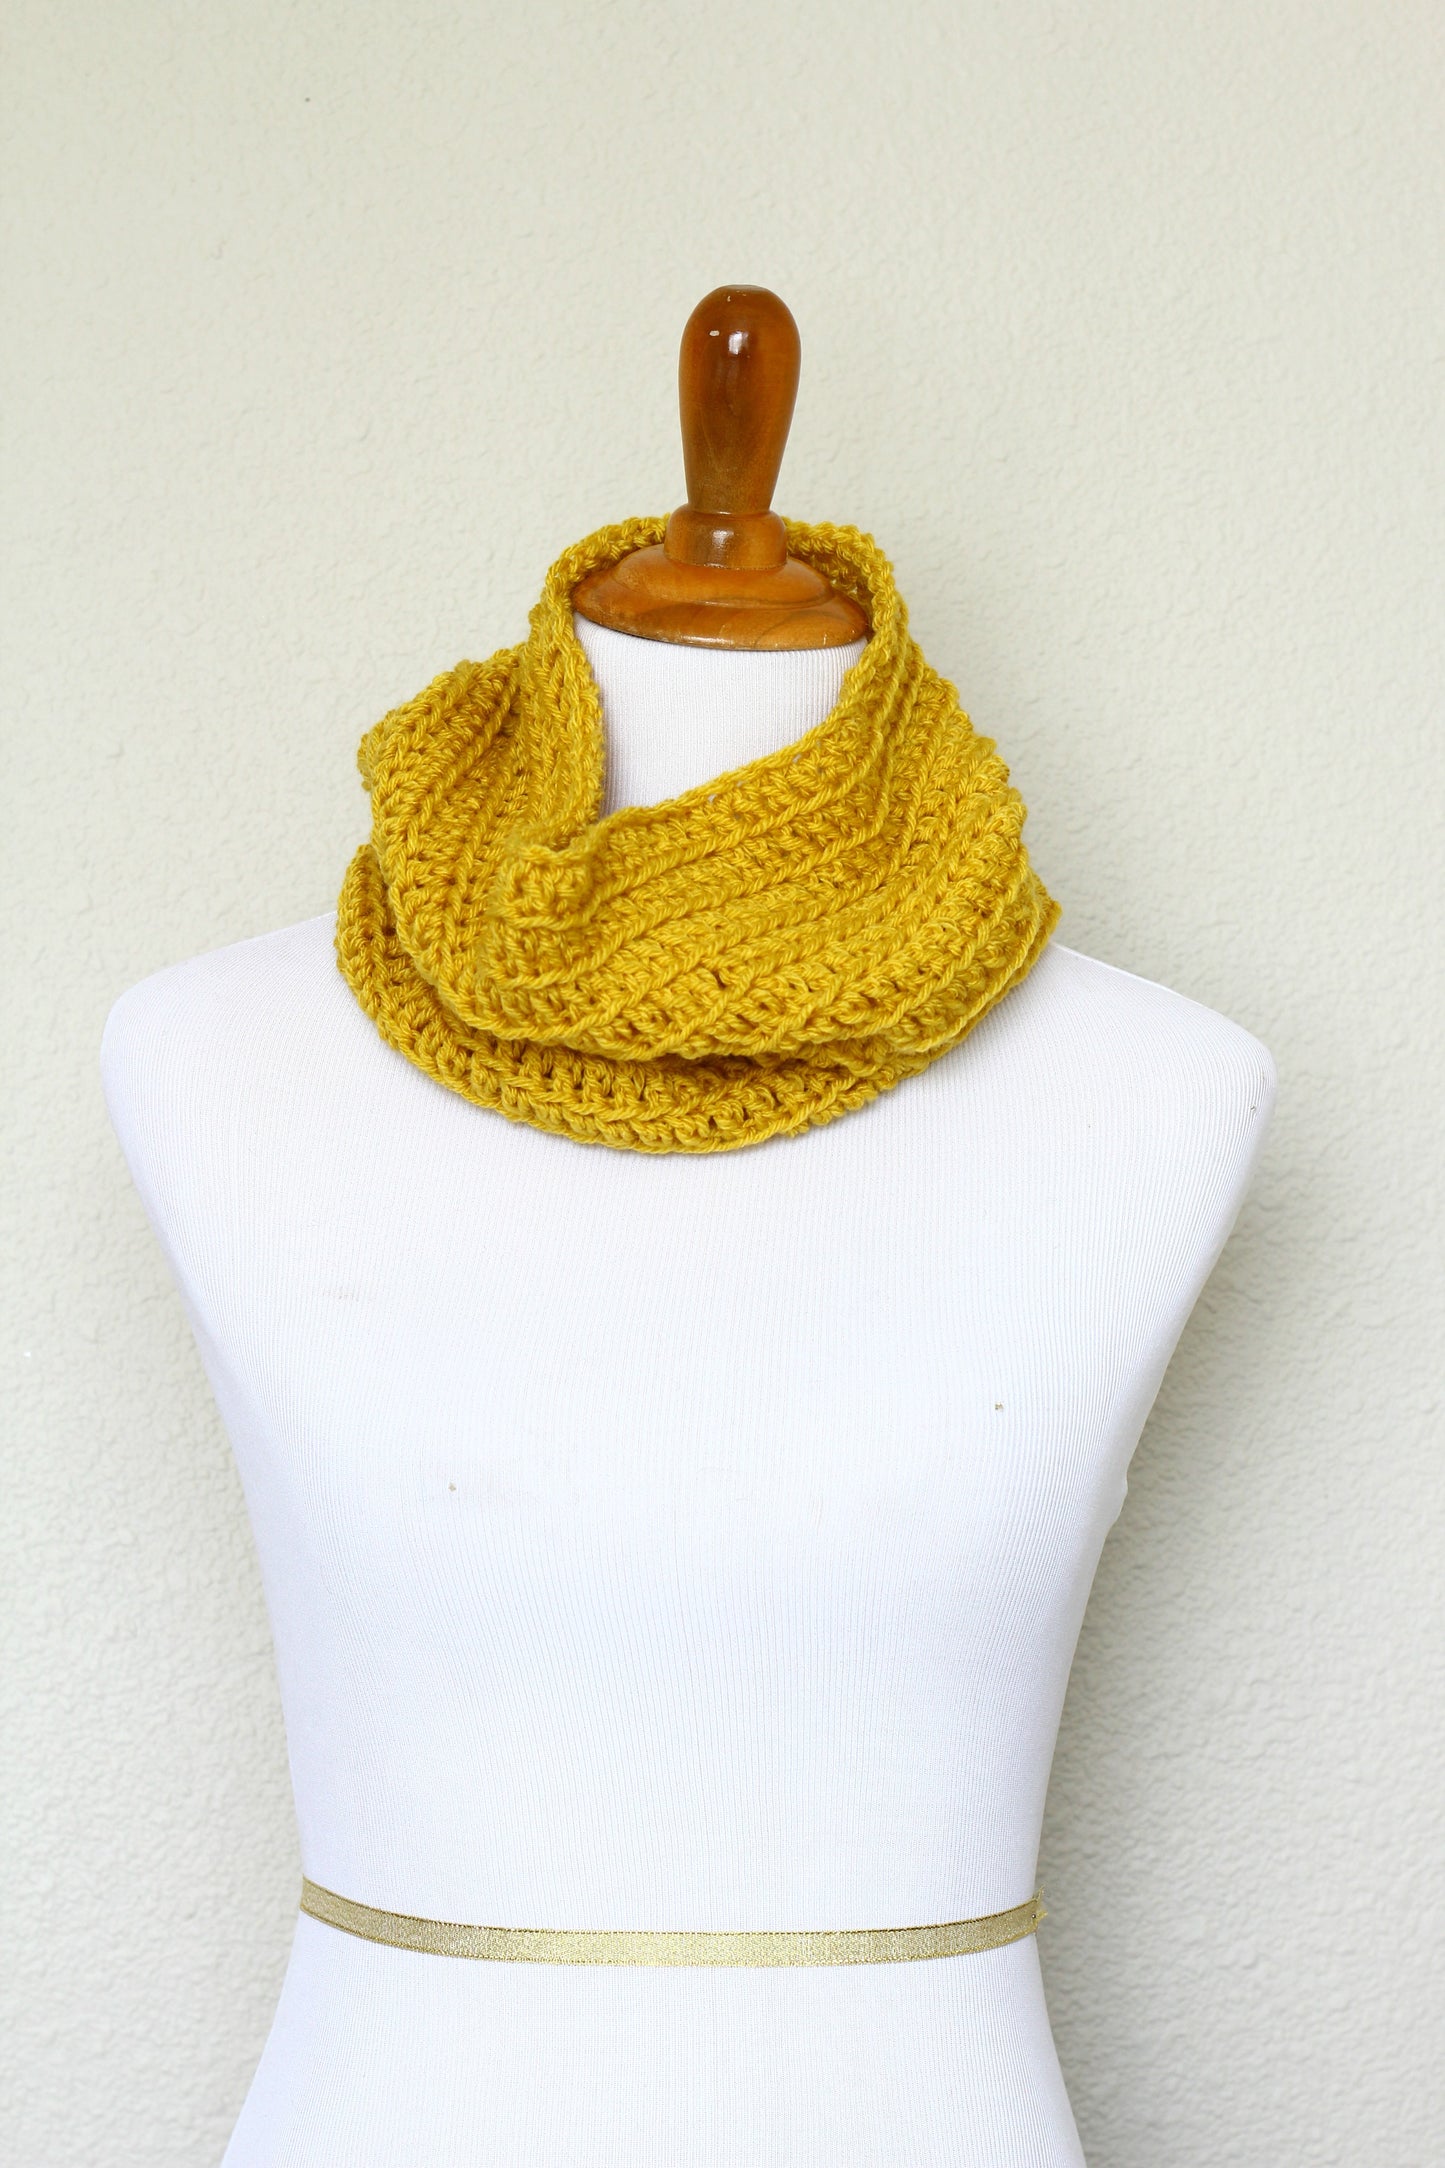 Crochet infinity scarf in mustard color, chunky cowl - 12 colors available